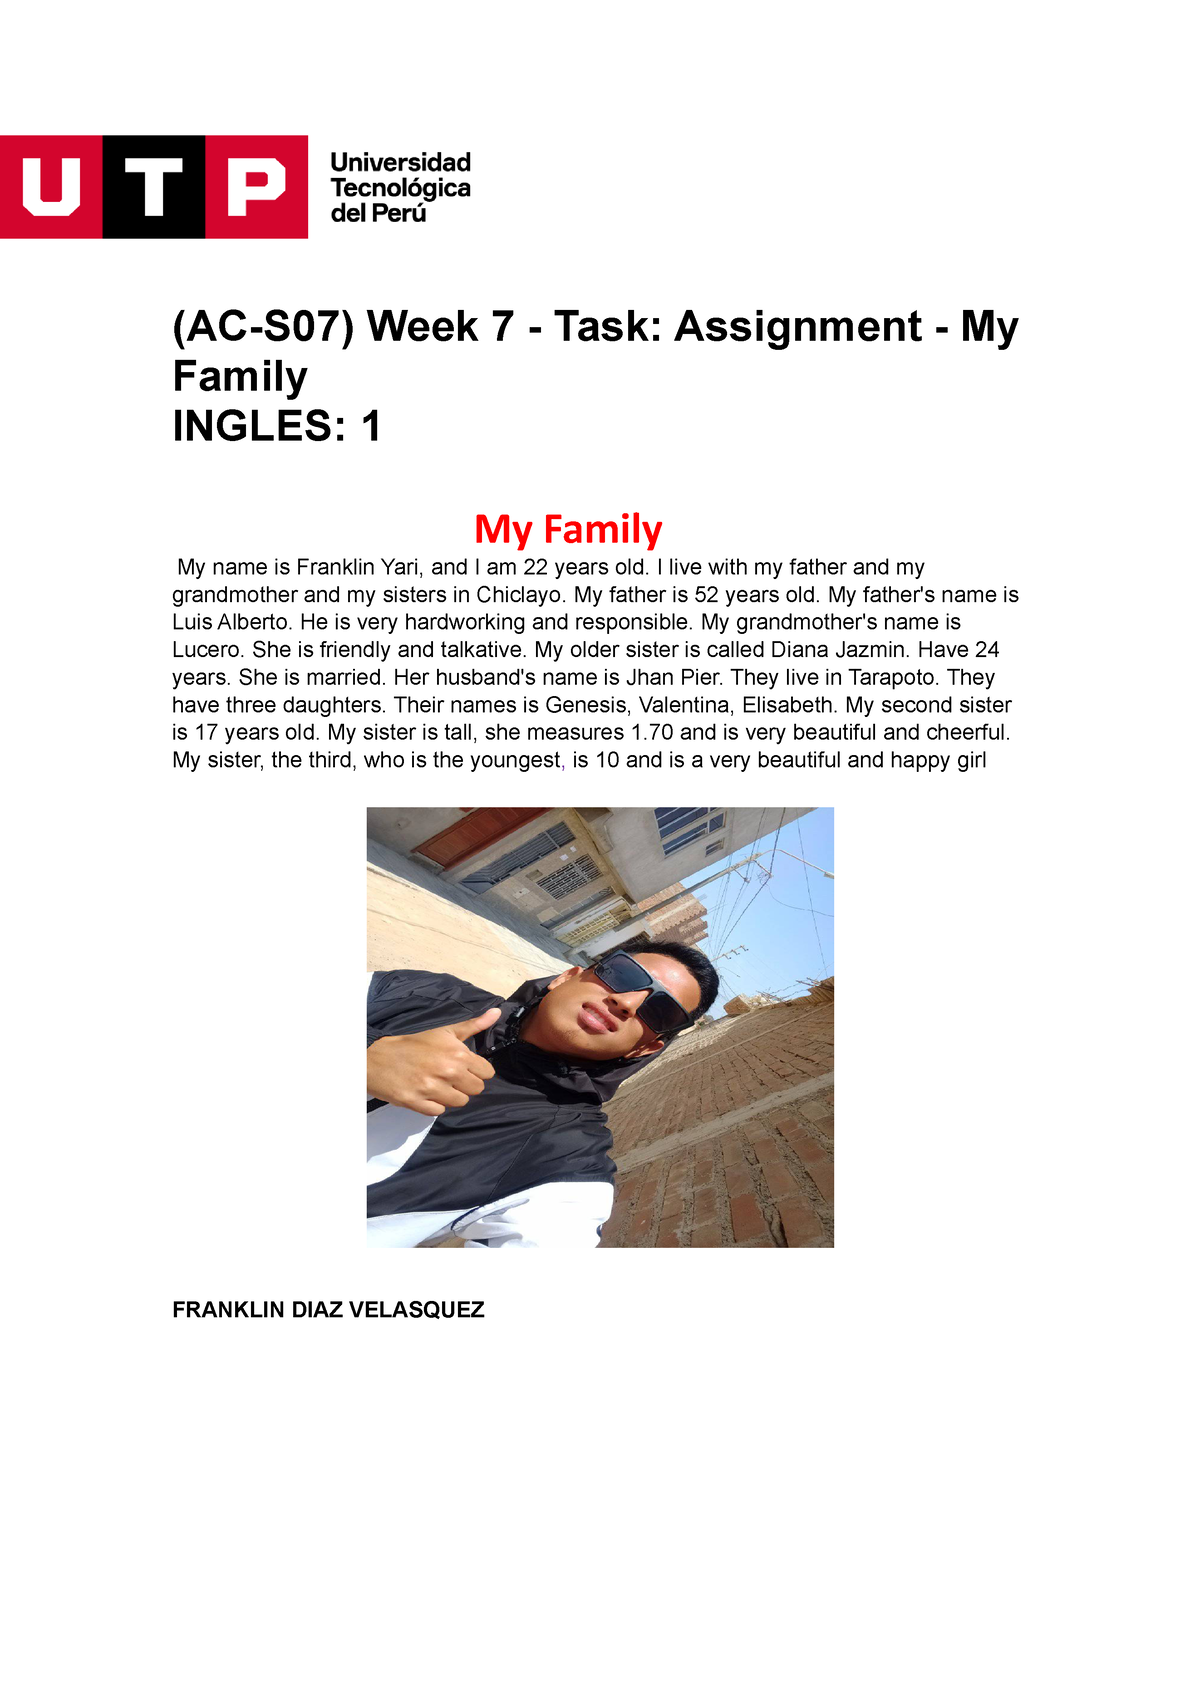 my family assignment